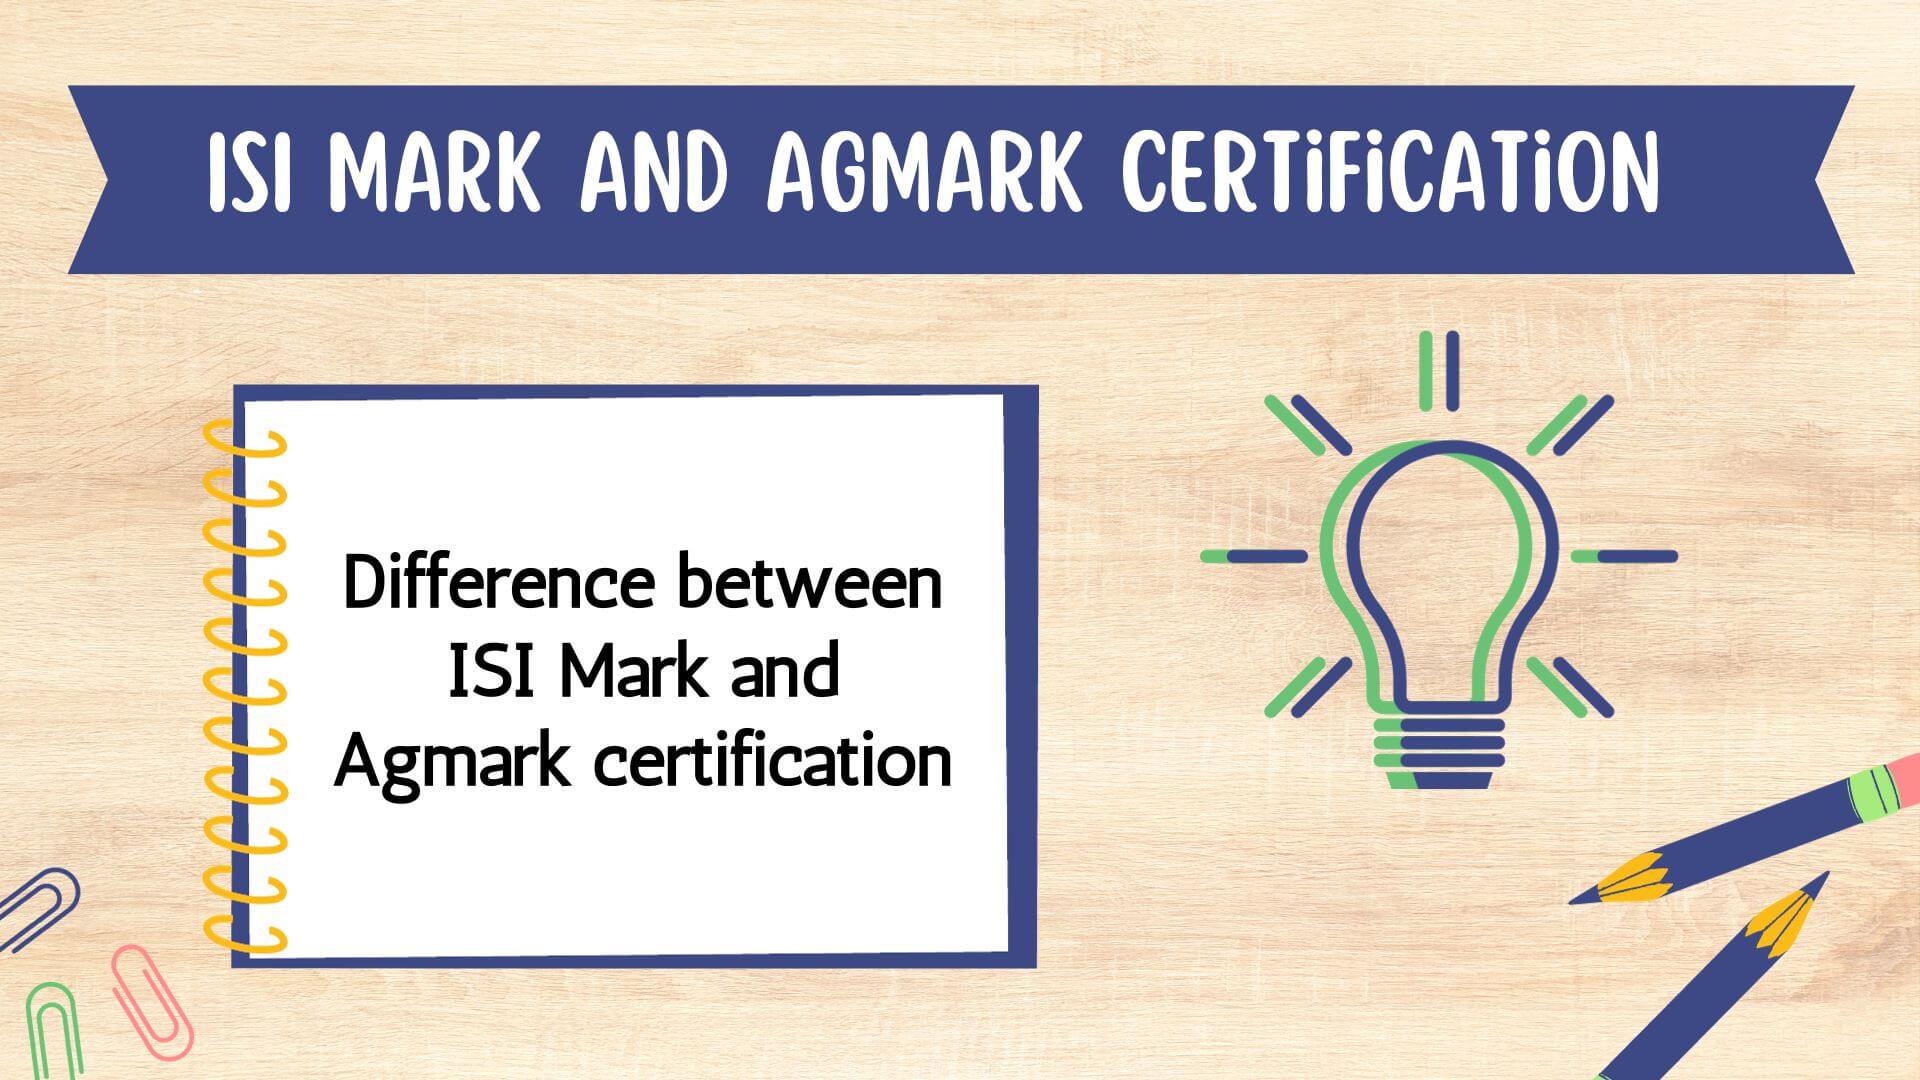 Agmark Certificate | Words, Certificate, Meant to be